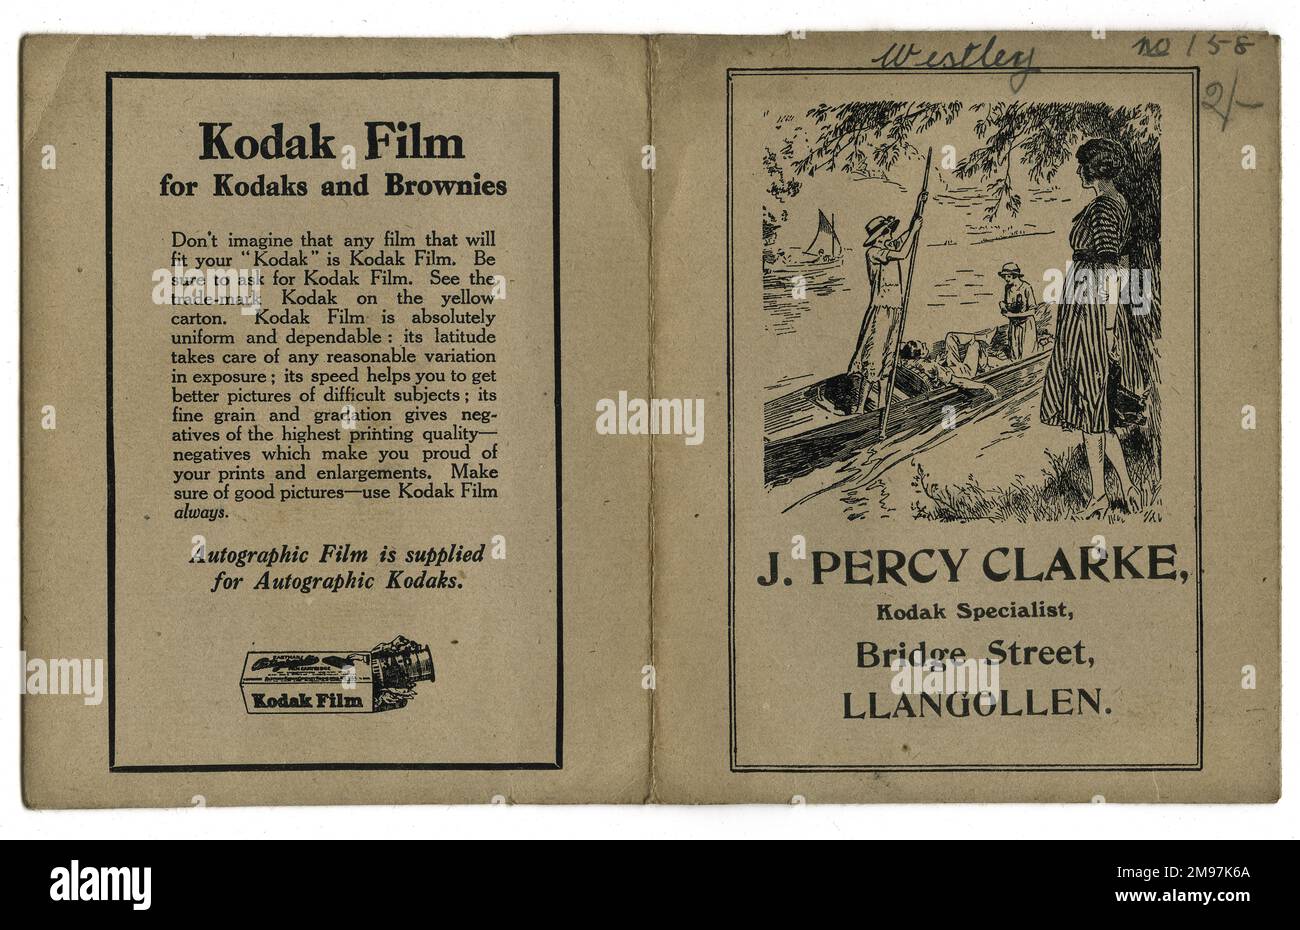 Photographic film wallet advertising Kodak Film, with the developer's name and address: J Percy Clarke, Bridge Street, Llangollen, Wales.  The customer's name is Westley, and the cost of developing two shillings. Stock Photo